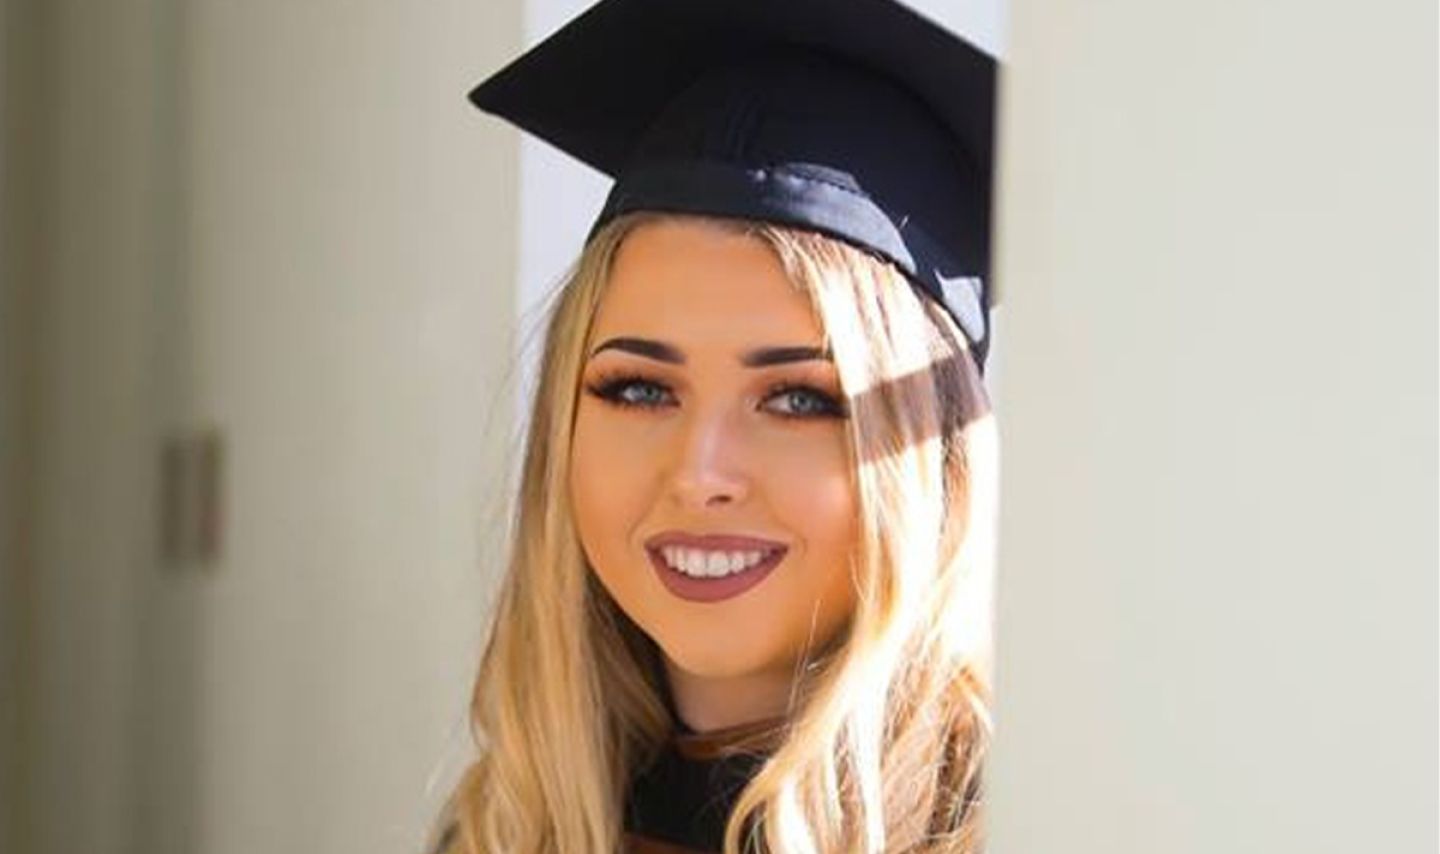 "You never get lost in the crowd", says SETU Criminal Justice graduate Claire